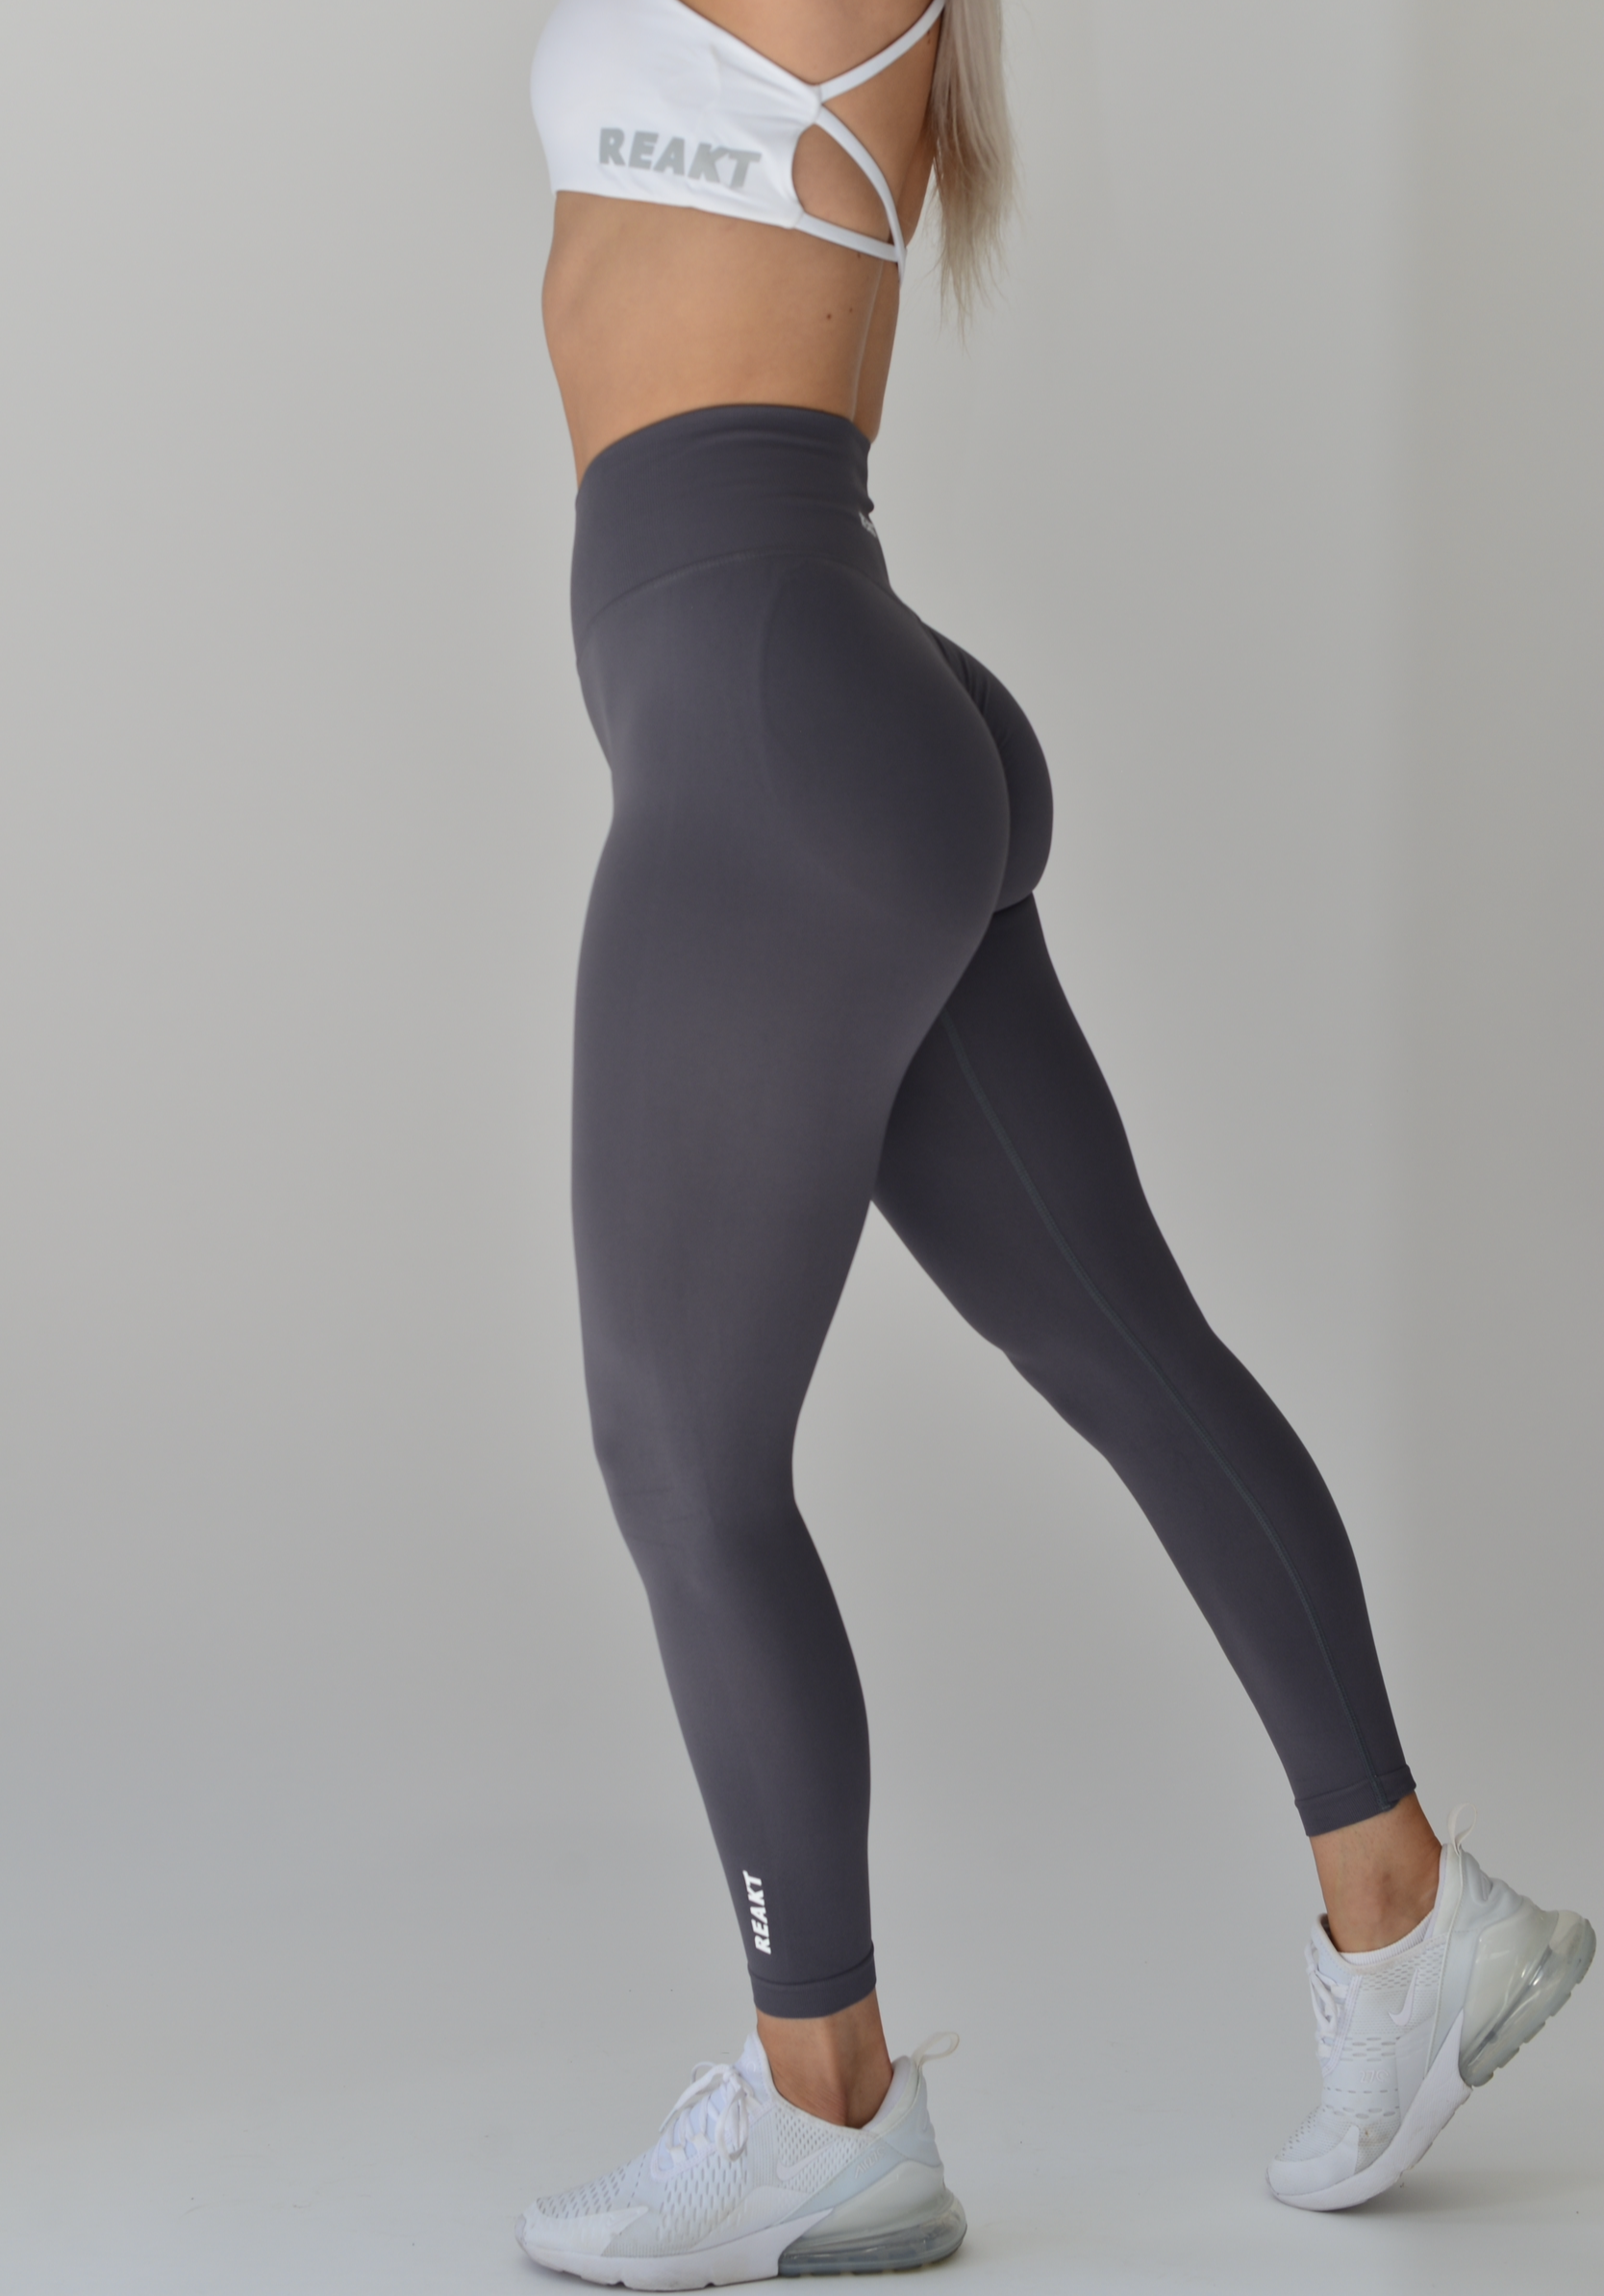 gymshark elevate leggings collection｜TikTok Search